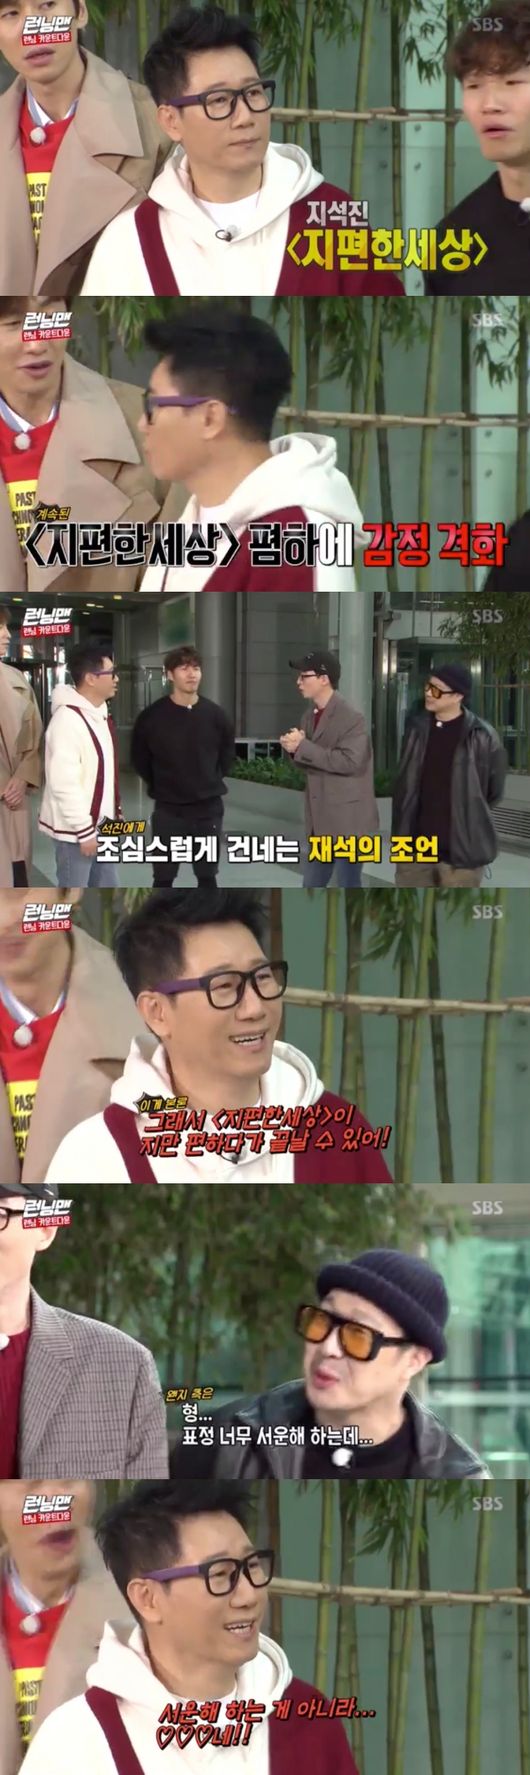 Running Man Ji Suk-jin made Furious for Yoo Jae-Suk, who was sneering over his personal channel.Ji Suk-jin announced that he opened an official YouTube channel on SBS entertainment program Running Man broadcast on the 16th.Ji Suk-jins personal channel name was The Difficult World; Ji Suk-jin said he wanted to do something like a talk show and revealed why he started YouTube.Yoo Jae-Suk said, I am worried about talking about talk show, is not the talk weak?Haha also said, The fact is that when my brother is a guest, he shines. Lee Kwang-soo also laughed, saying, If you do not sleep these days, you will see your brother.Ji Suk-jin burst into Furious in the following jokes of the members and raised his voice saying, I will not get any help from you.Without regard, Yoo Jae-Suk said, I usually do not follow the title, but it can end in comfort.Ji Suk-jin then responded with a laugh, Its not sad, its XXX.Running Man screen captures